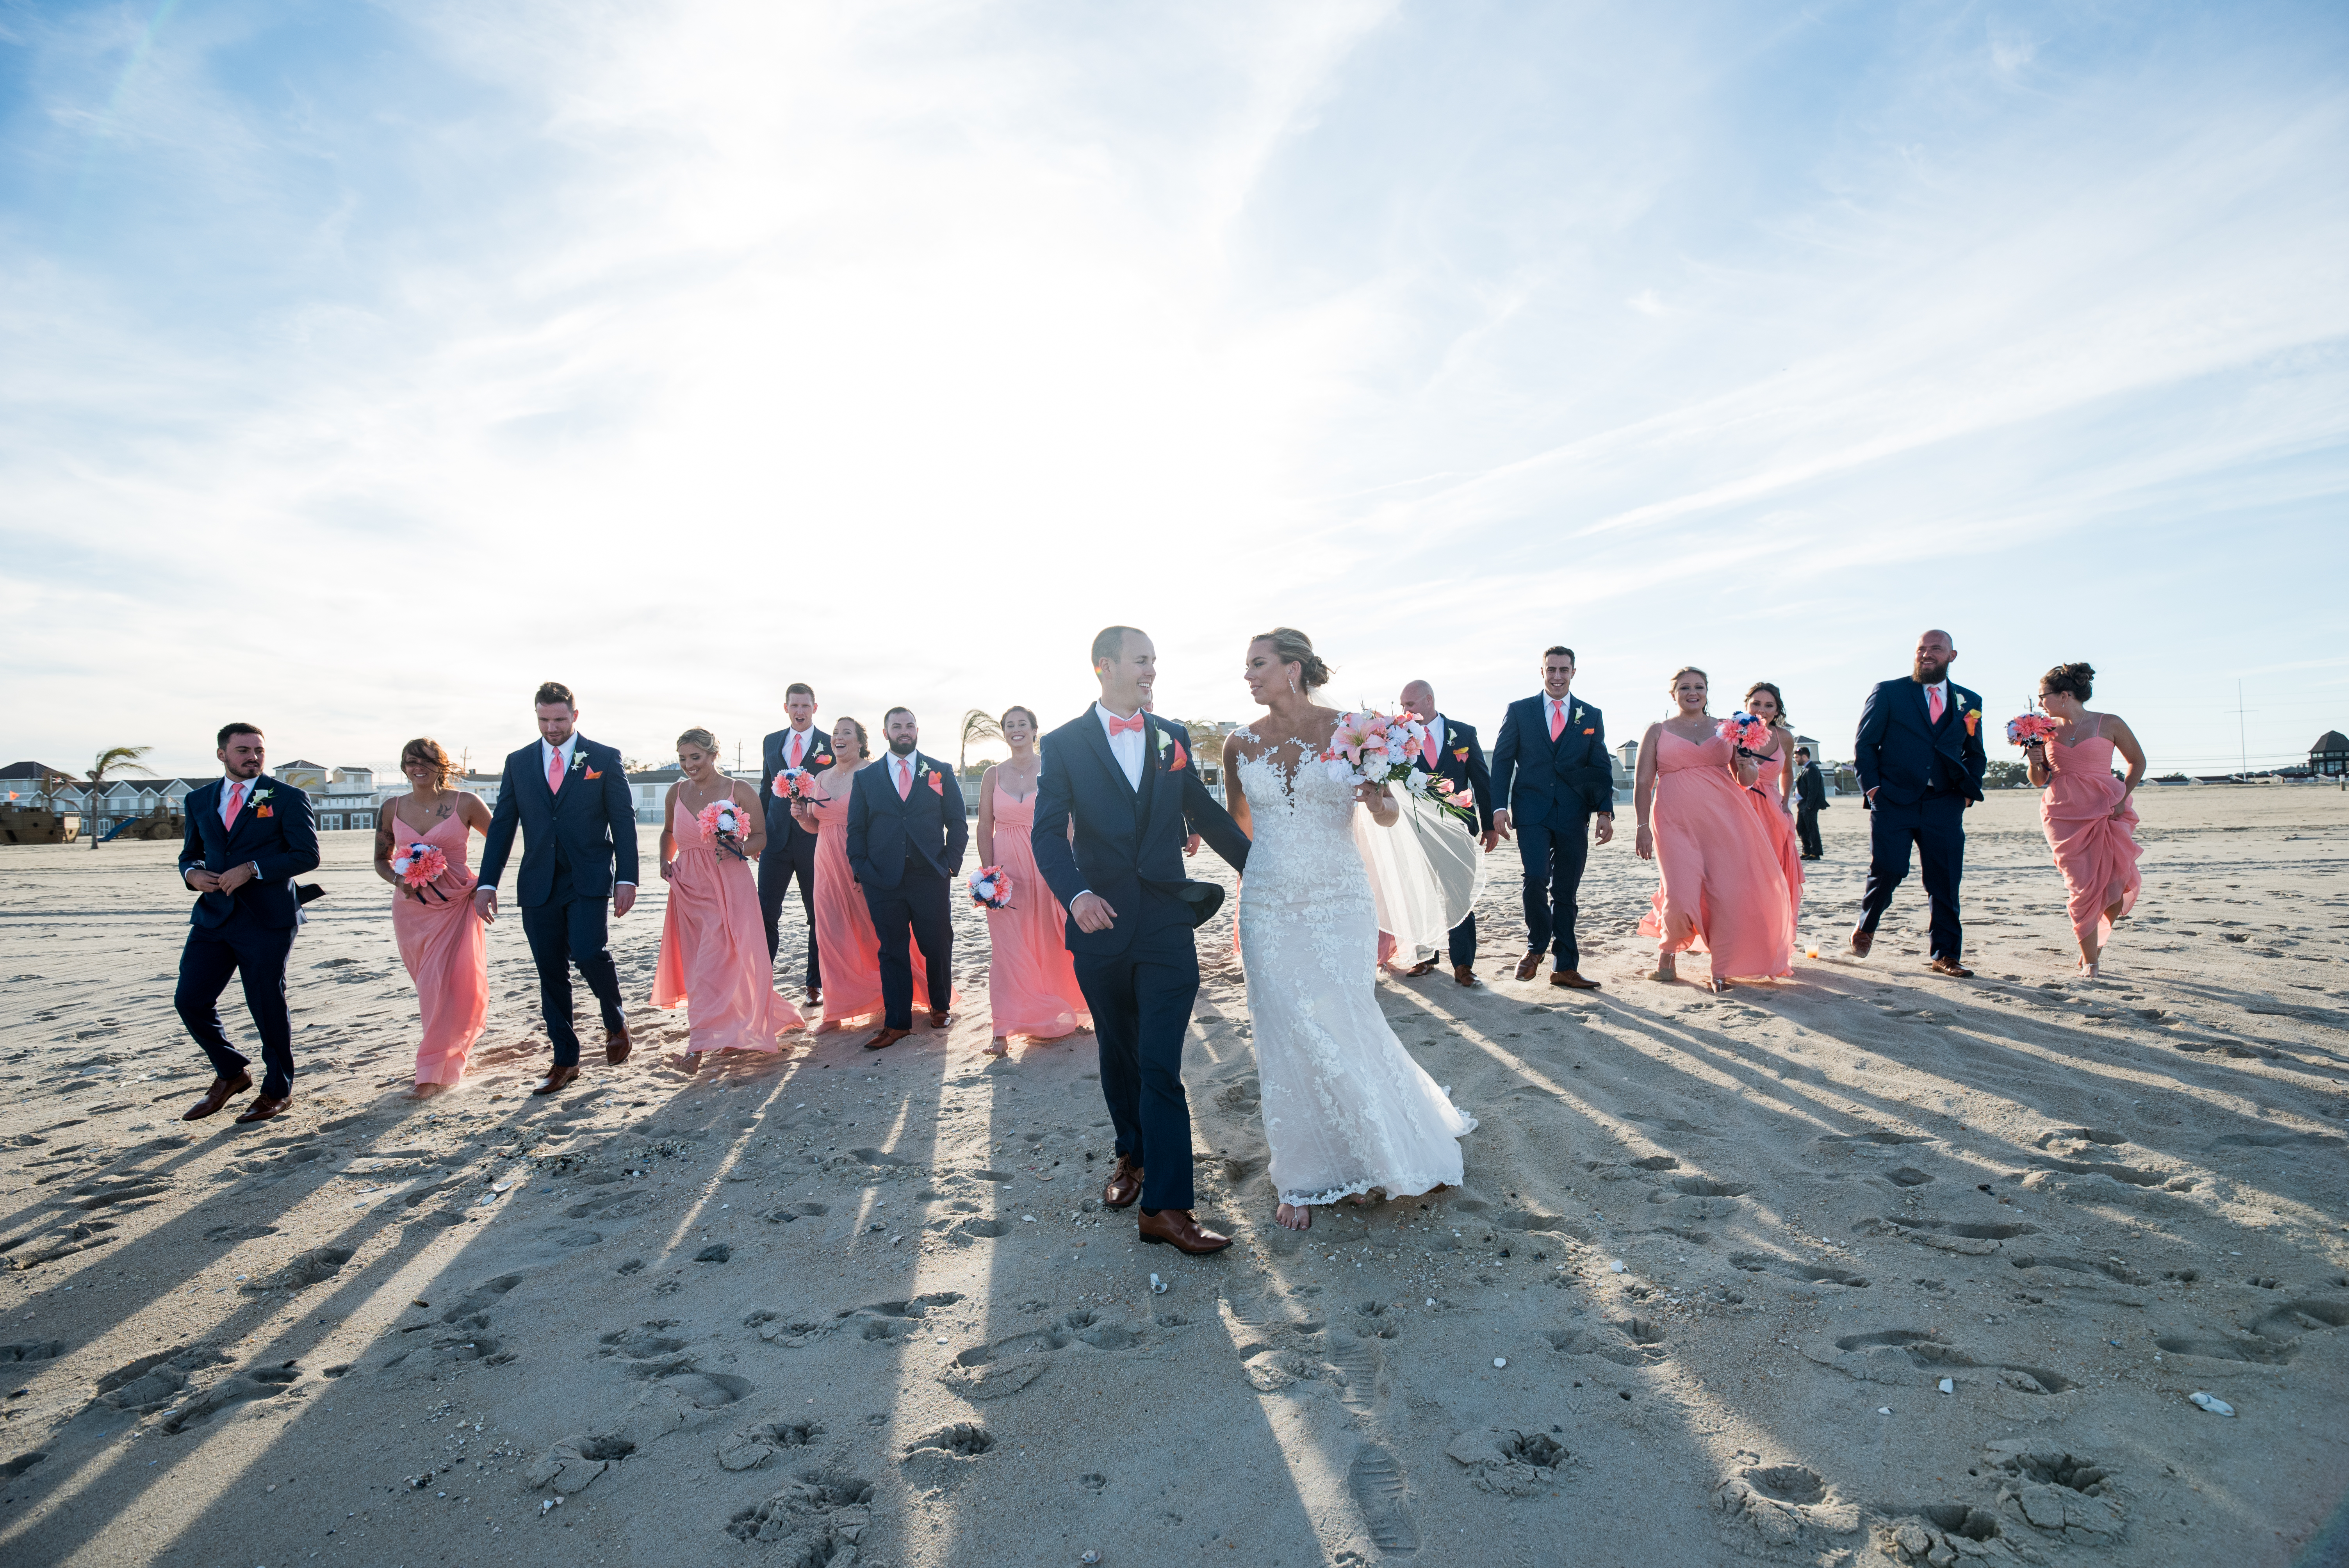 wedding photography cost in nj